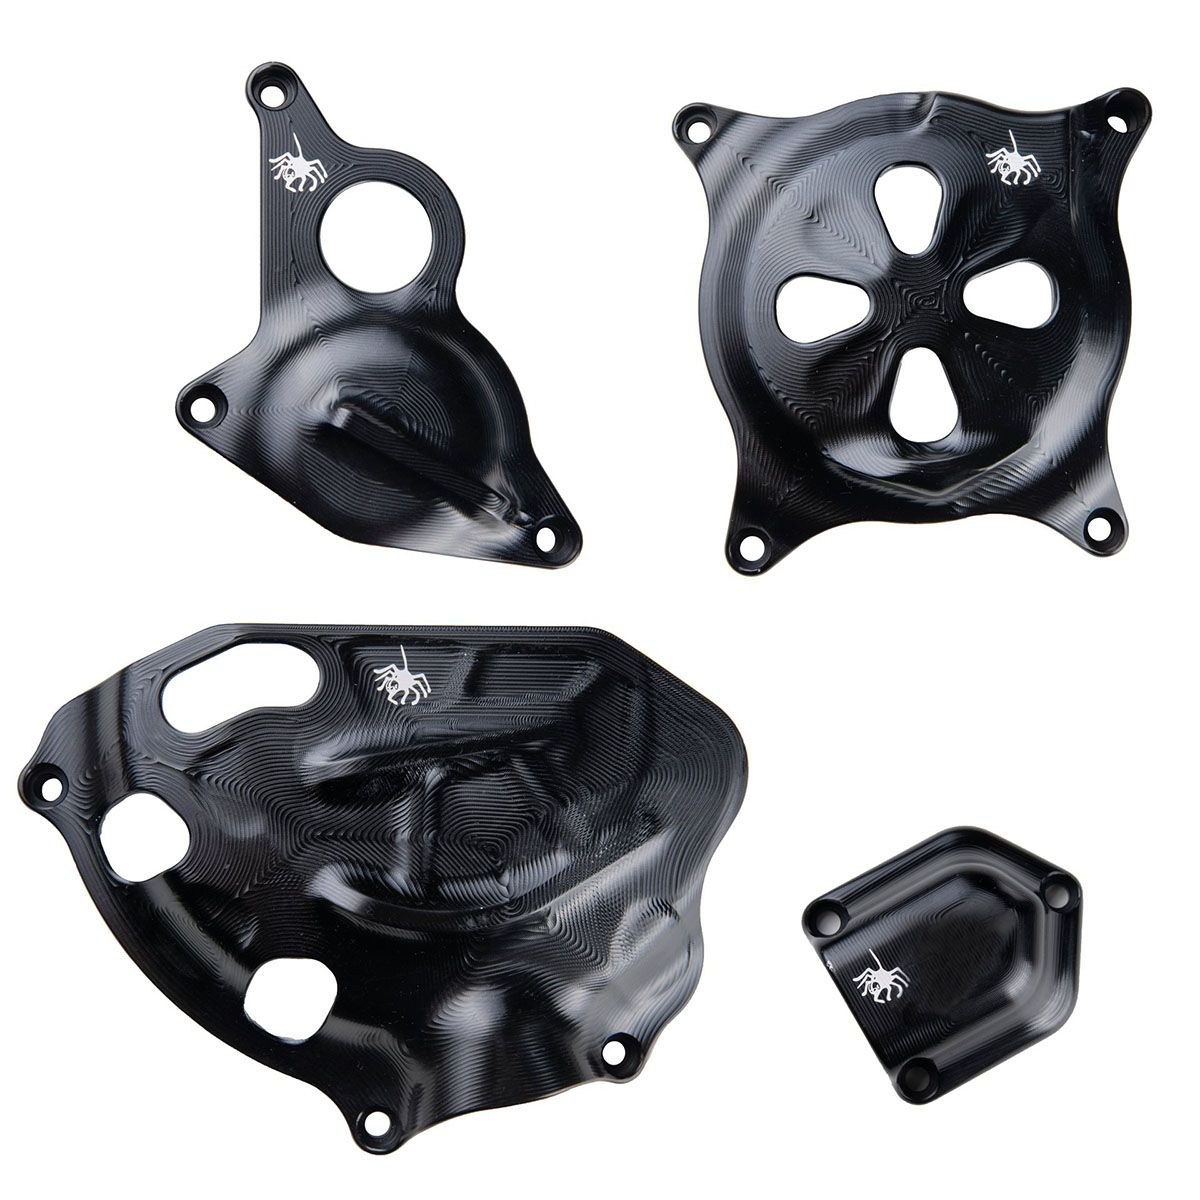 BMW S1000RR 2019-2020 SPIDER Water Pump Cover Protection